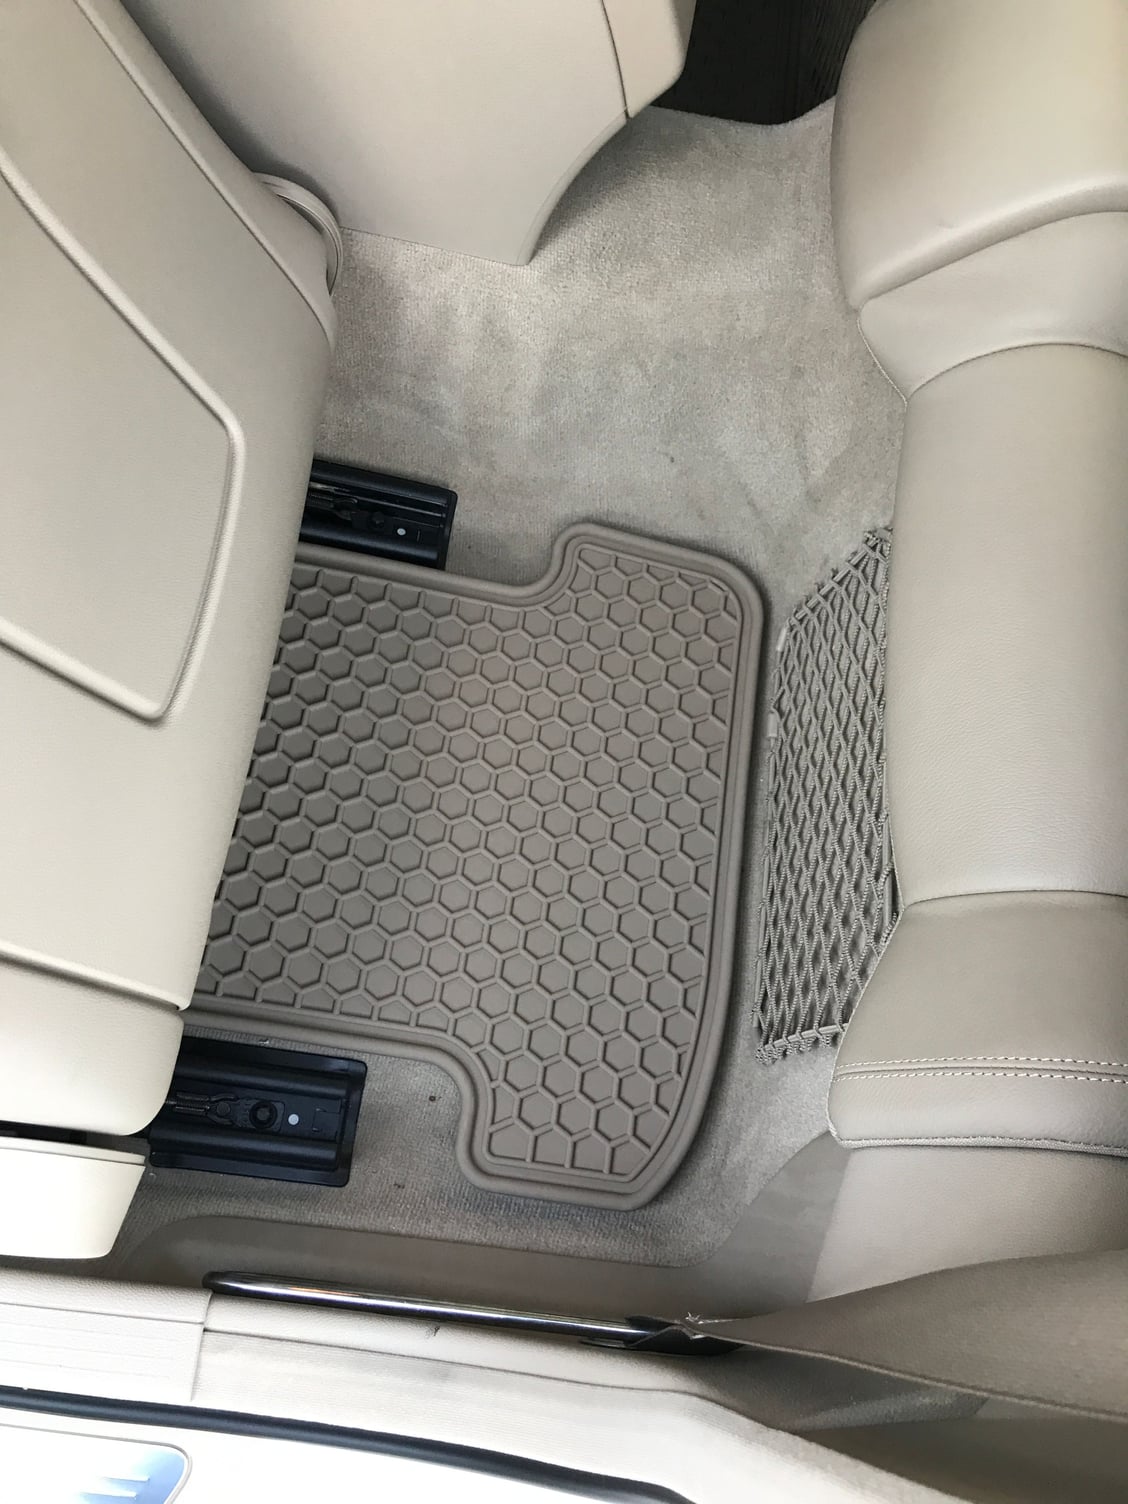 Interior/Upholstery - W207 coupe rubber floor mats beige oem - Used - 2012 Mercedes-Benz E350 - Reseda, CA 91335, United States